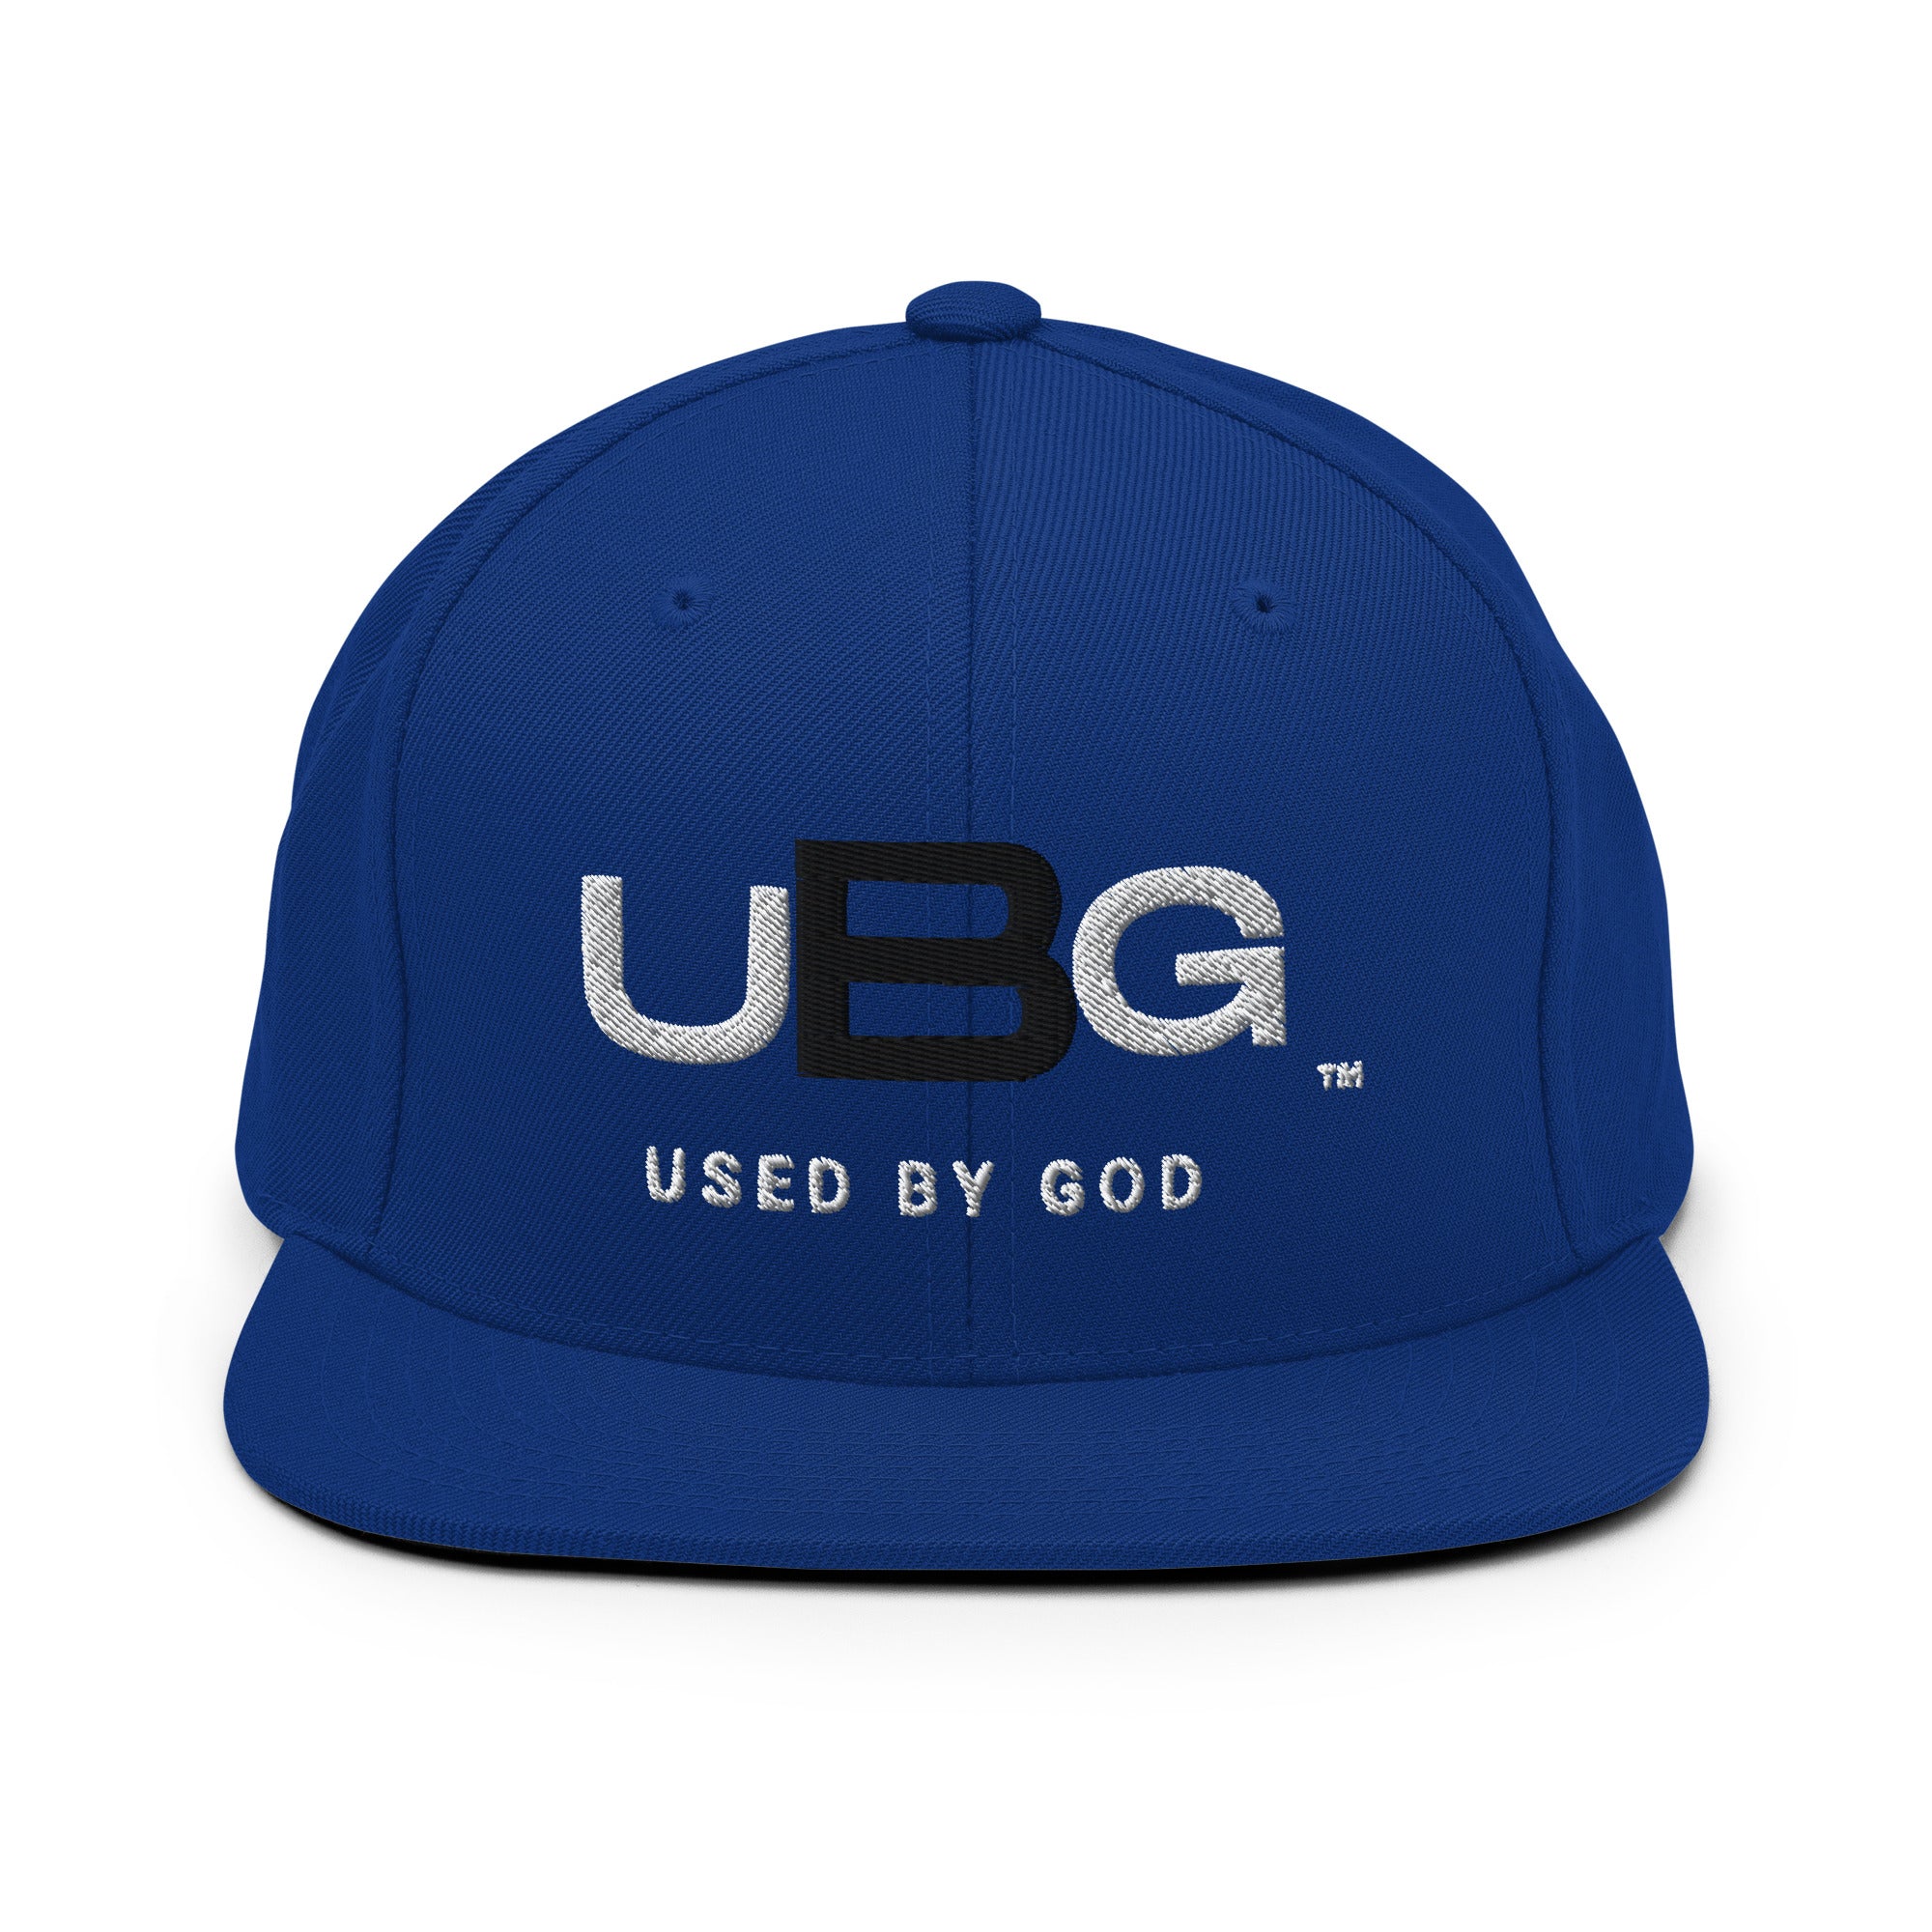 Original Used By God Snapback Hat, Used By God, Used By God Clothing, Christian Apparel, Christian Hats, Christian T-Shirts, Christian Clothing, God Shirts, Christian Sweatshirts, God Clothing, Jesus Hoodie, Jesus Clothes, God Is Dope, Art Of Homage, Red Letter Clothing, Elevated Faith, Active Faith Sports, Beacon Threads, God The Father Apparel